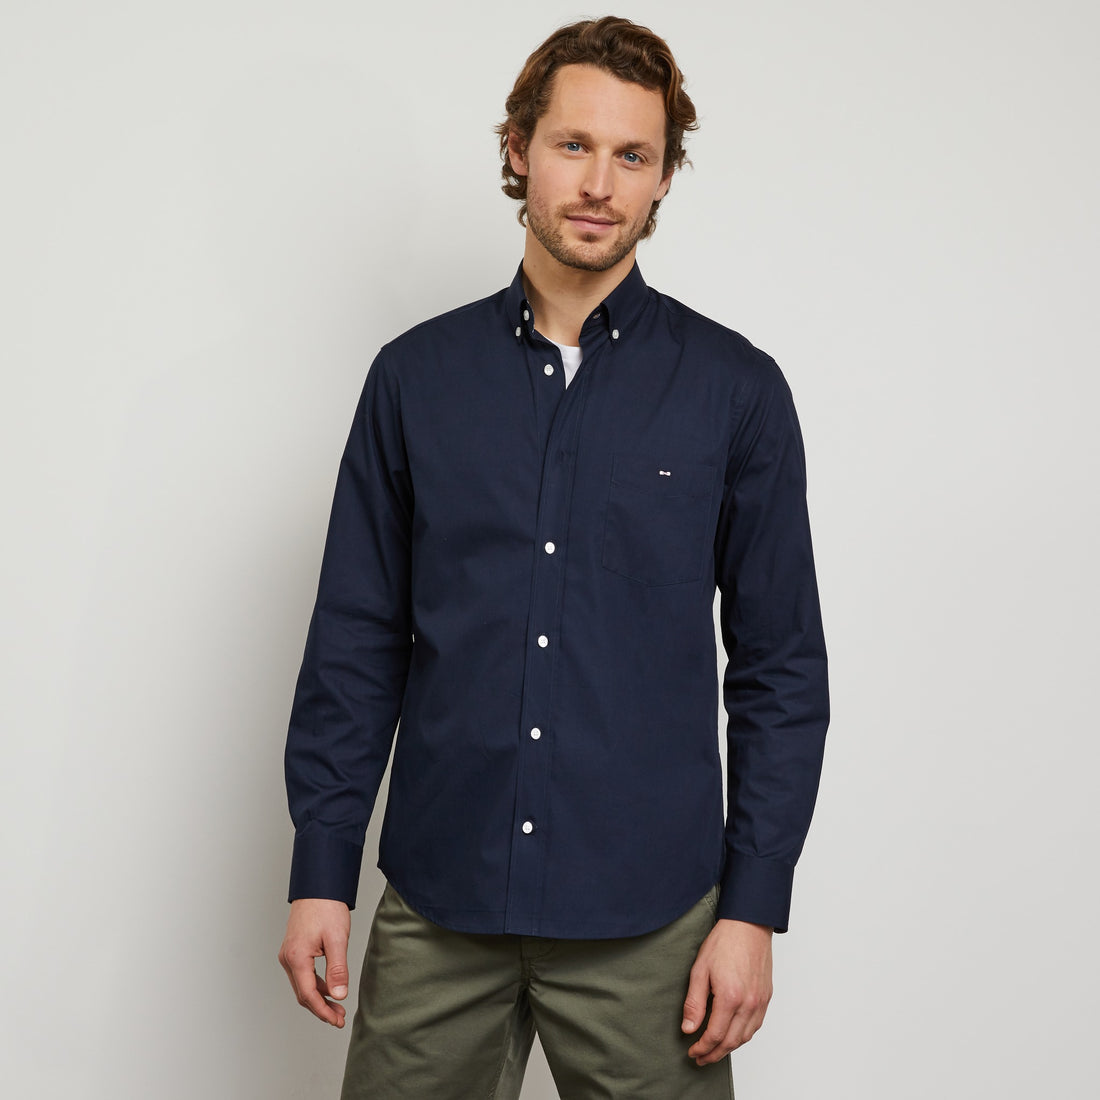 Dark Blue Shirt With Decorative Elbow Patches - 02